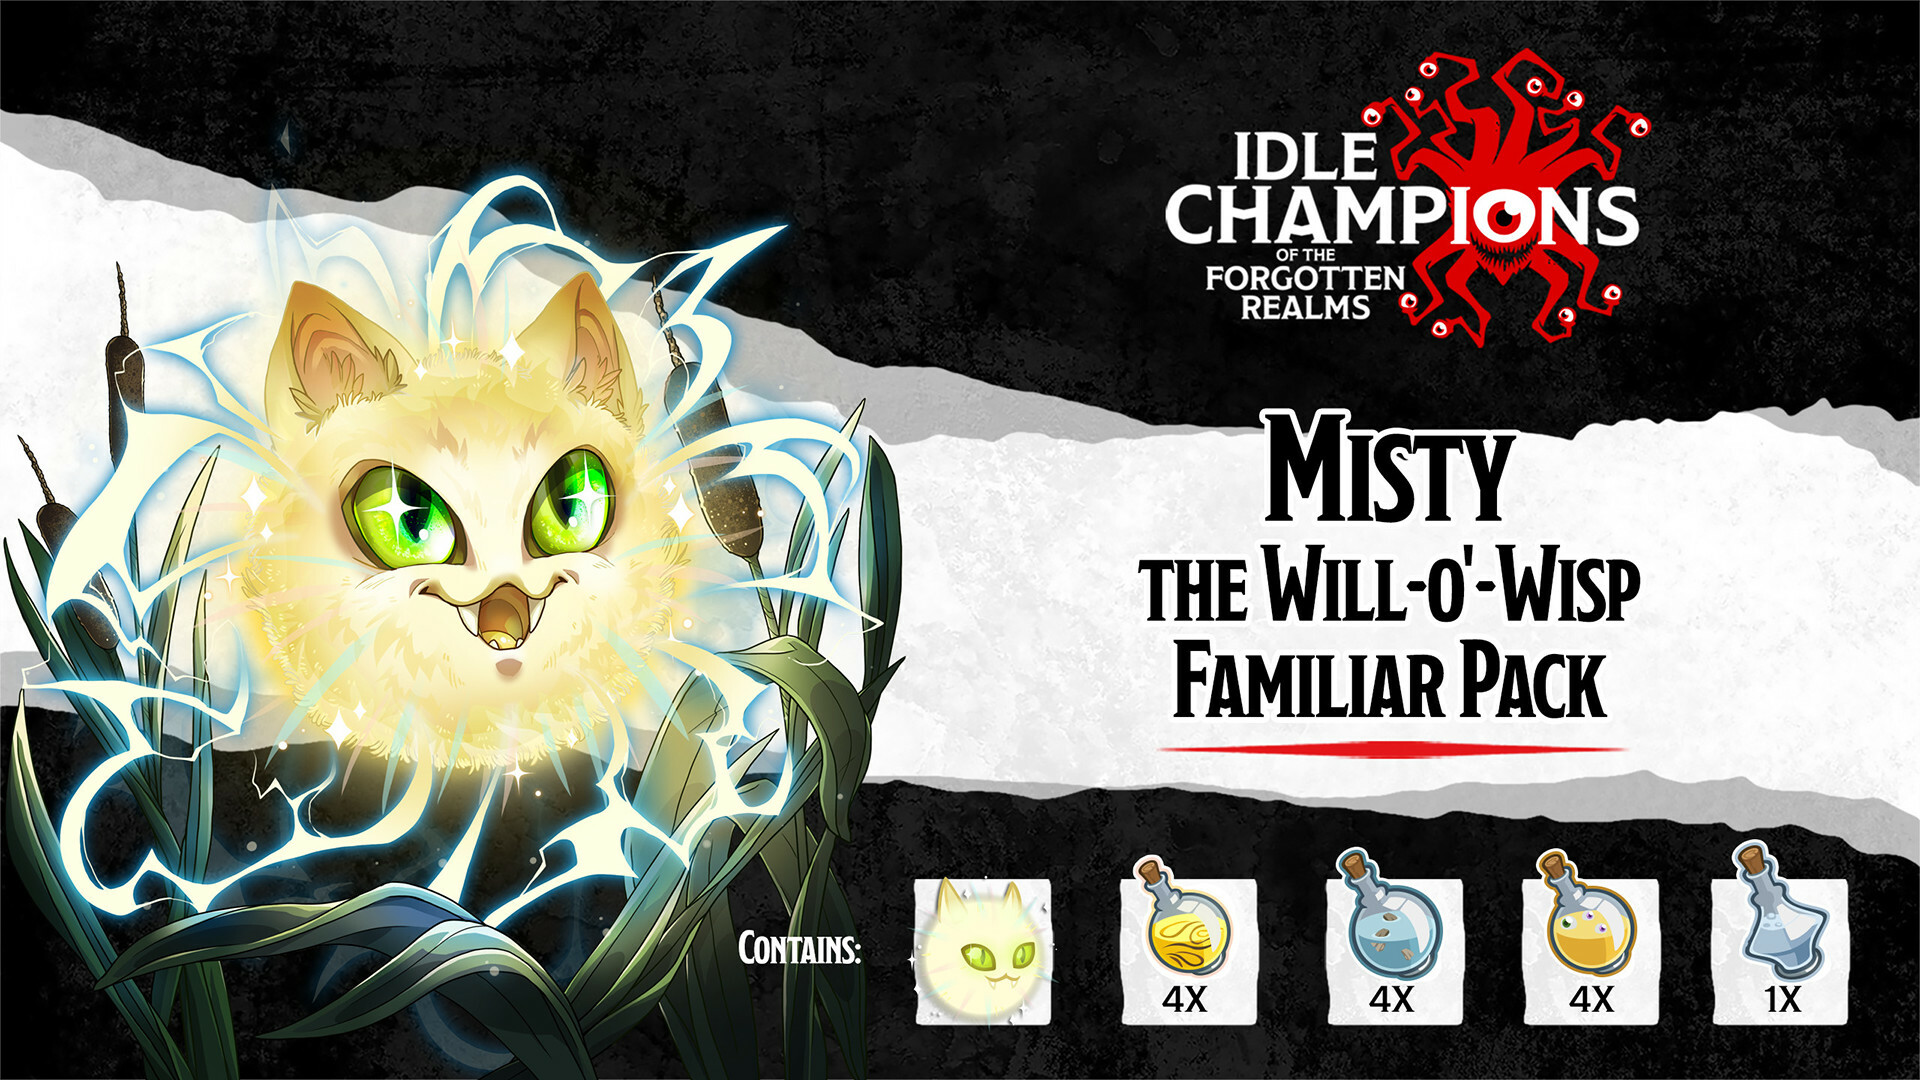 Idle Champions - Misty the Will-o'-Wisp Familiar Pack Featured Screenshot #1